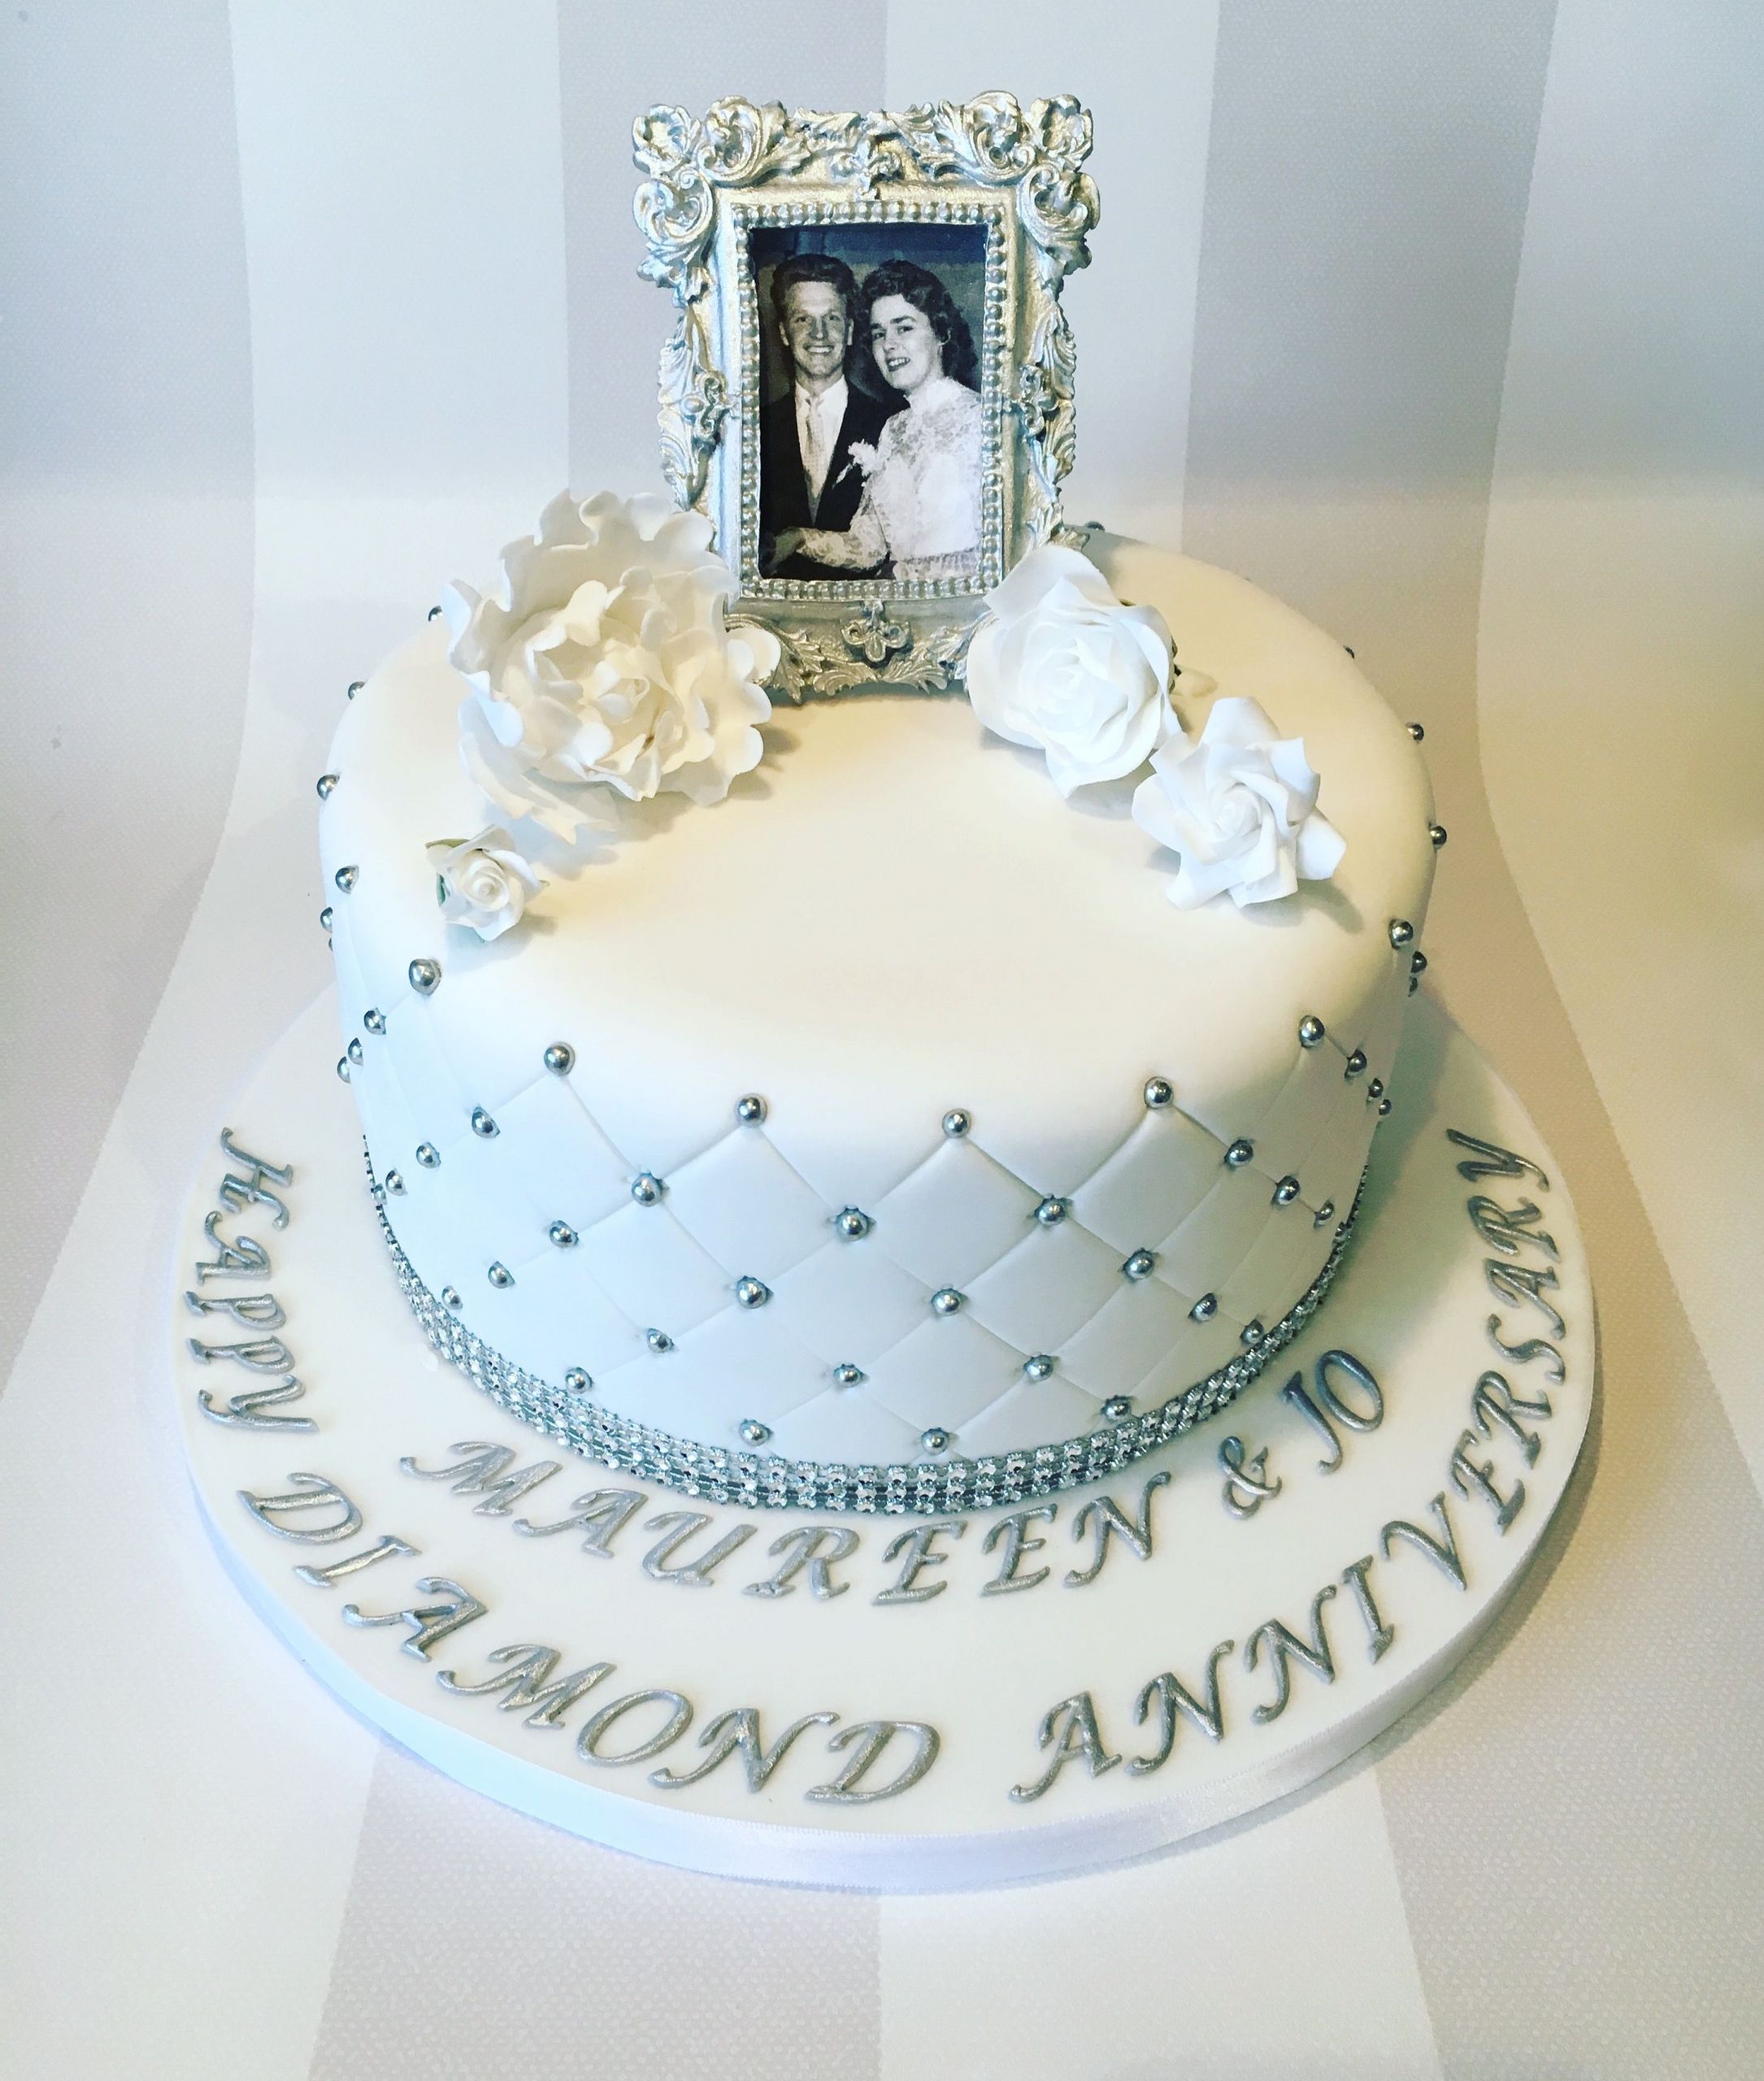 Edible Diamonds For Wedding Cakes
 Diamond wedding anniversary cake with quilting and edible